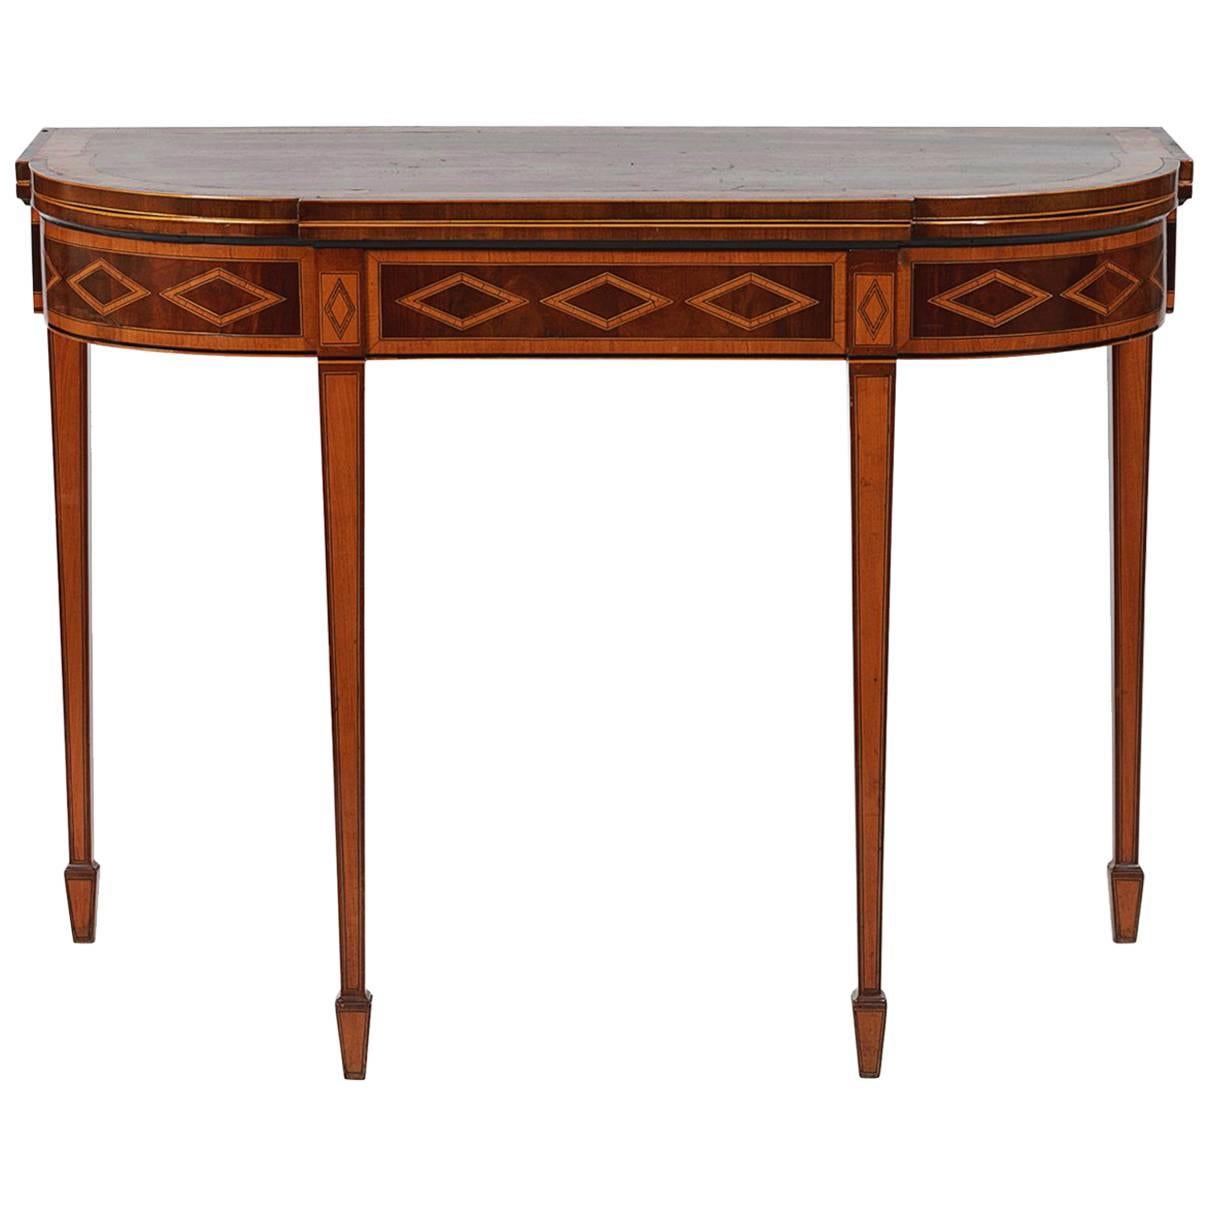 19th Century Inlaid D-Shaped Card Table